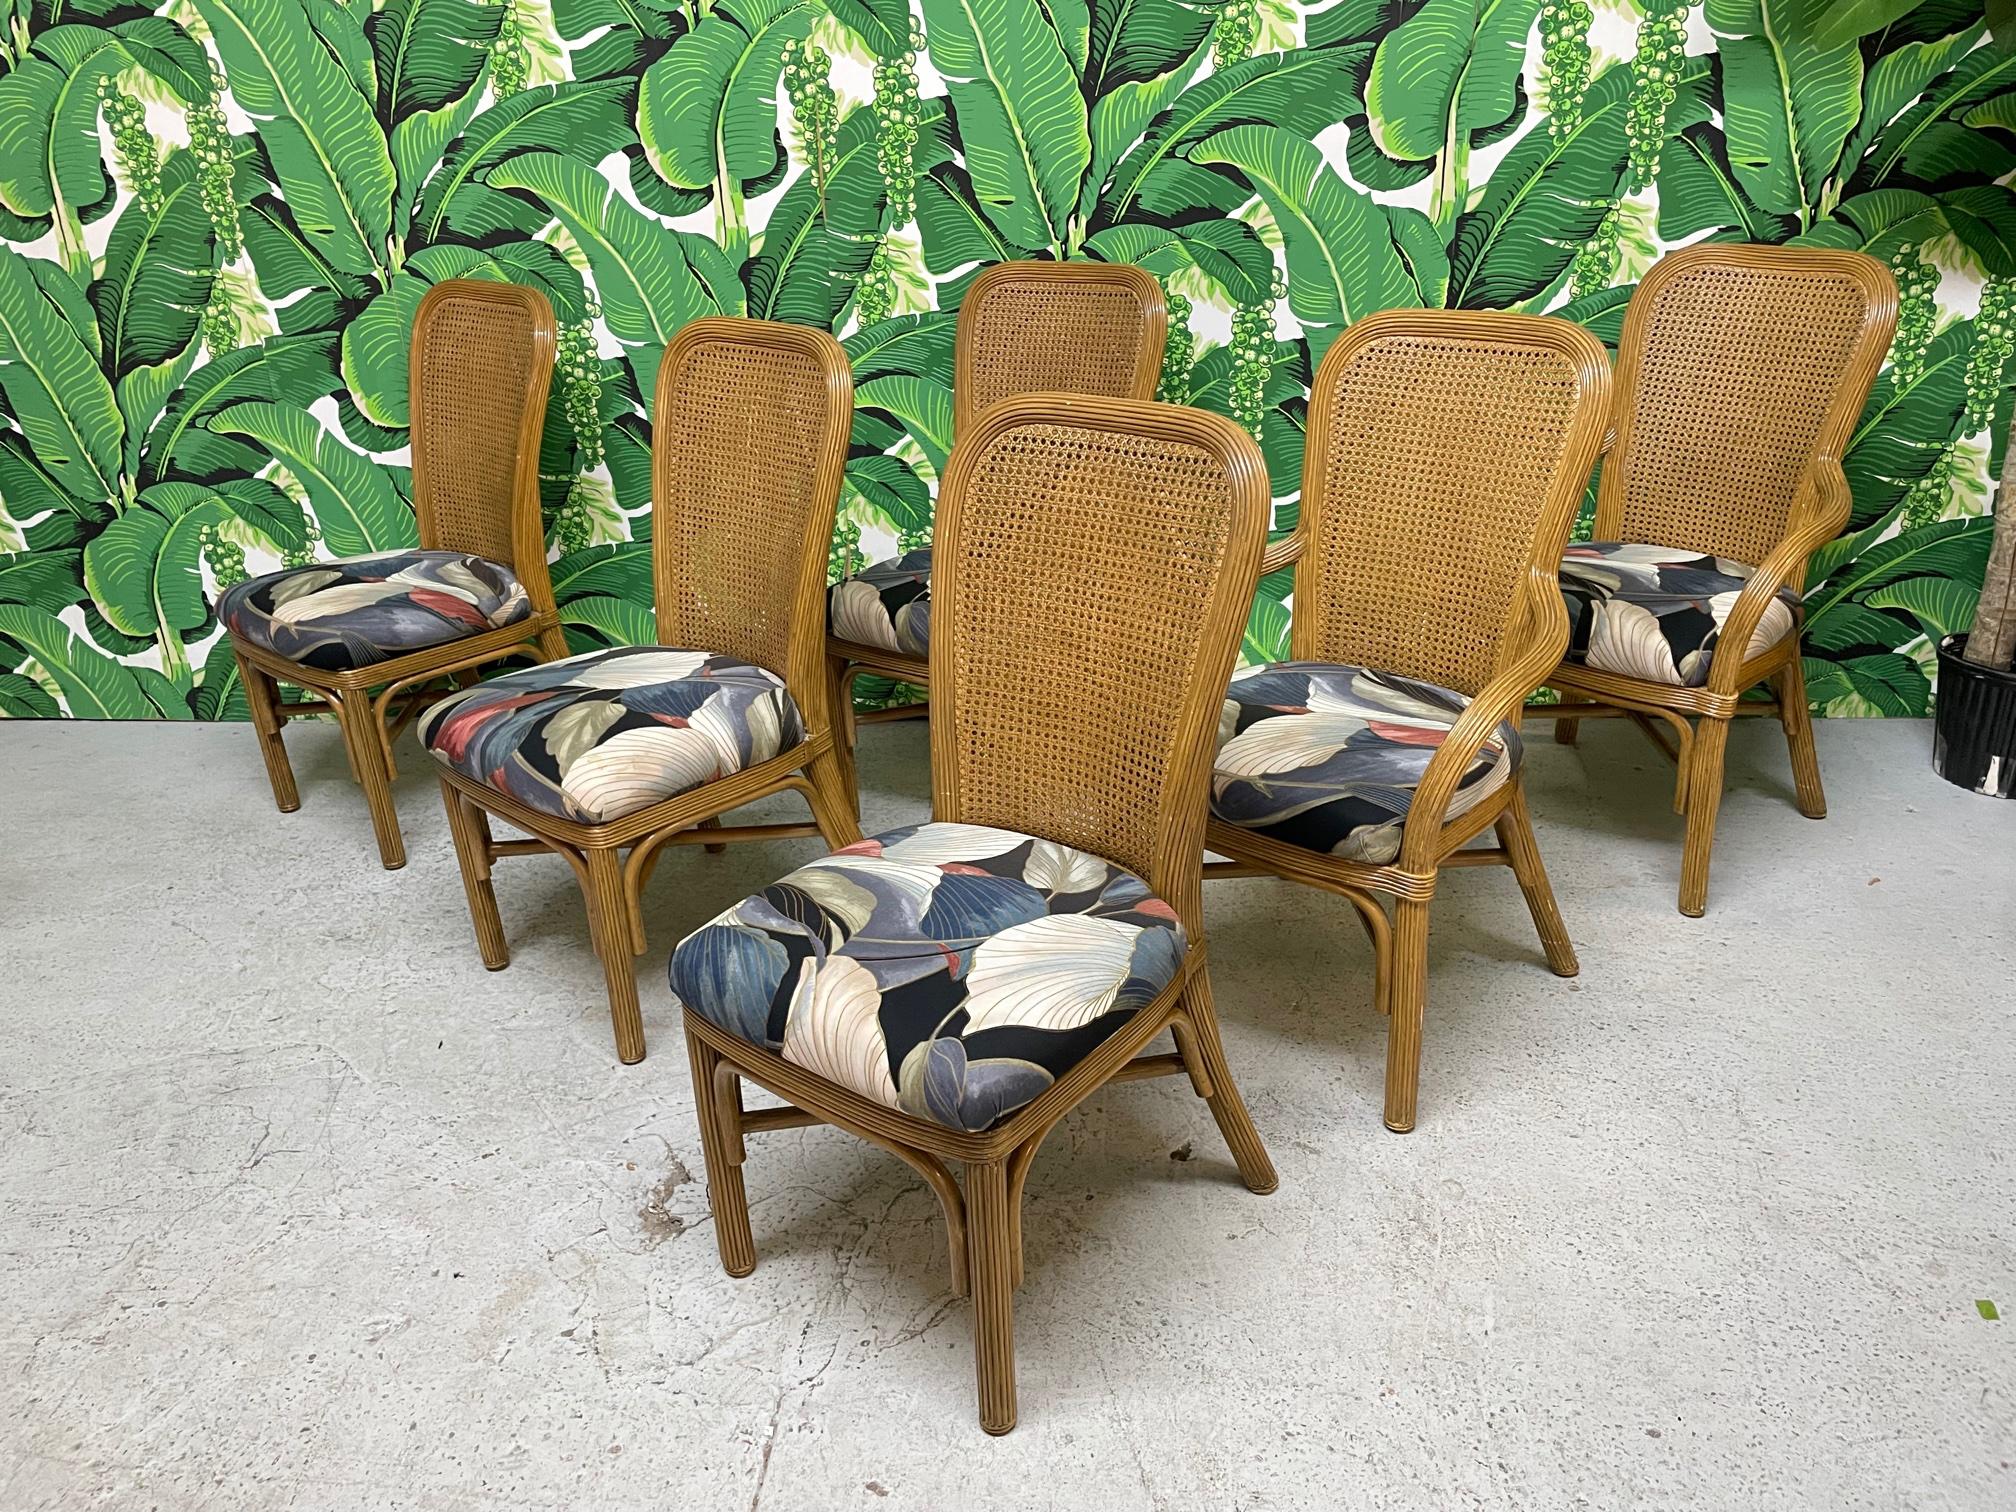 Set of six vintage rattan dining chairs feature veneer of pencil reed rattan and double cane backs. Set consists of 2 arm chairs and 4 side chairs. Very comfortable cushions and structurally sound frames. Very good condition overall, some minor